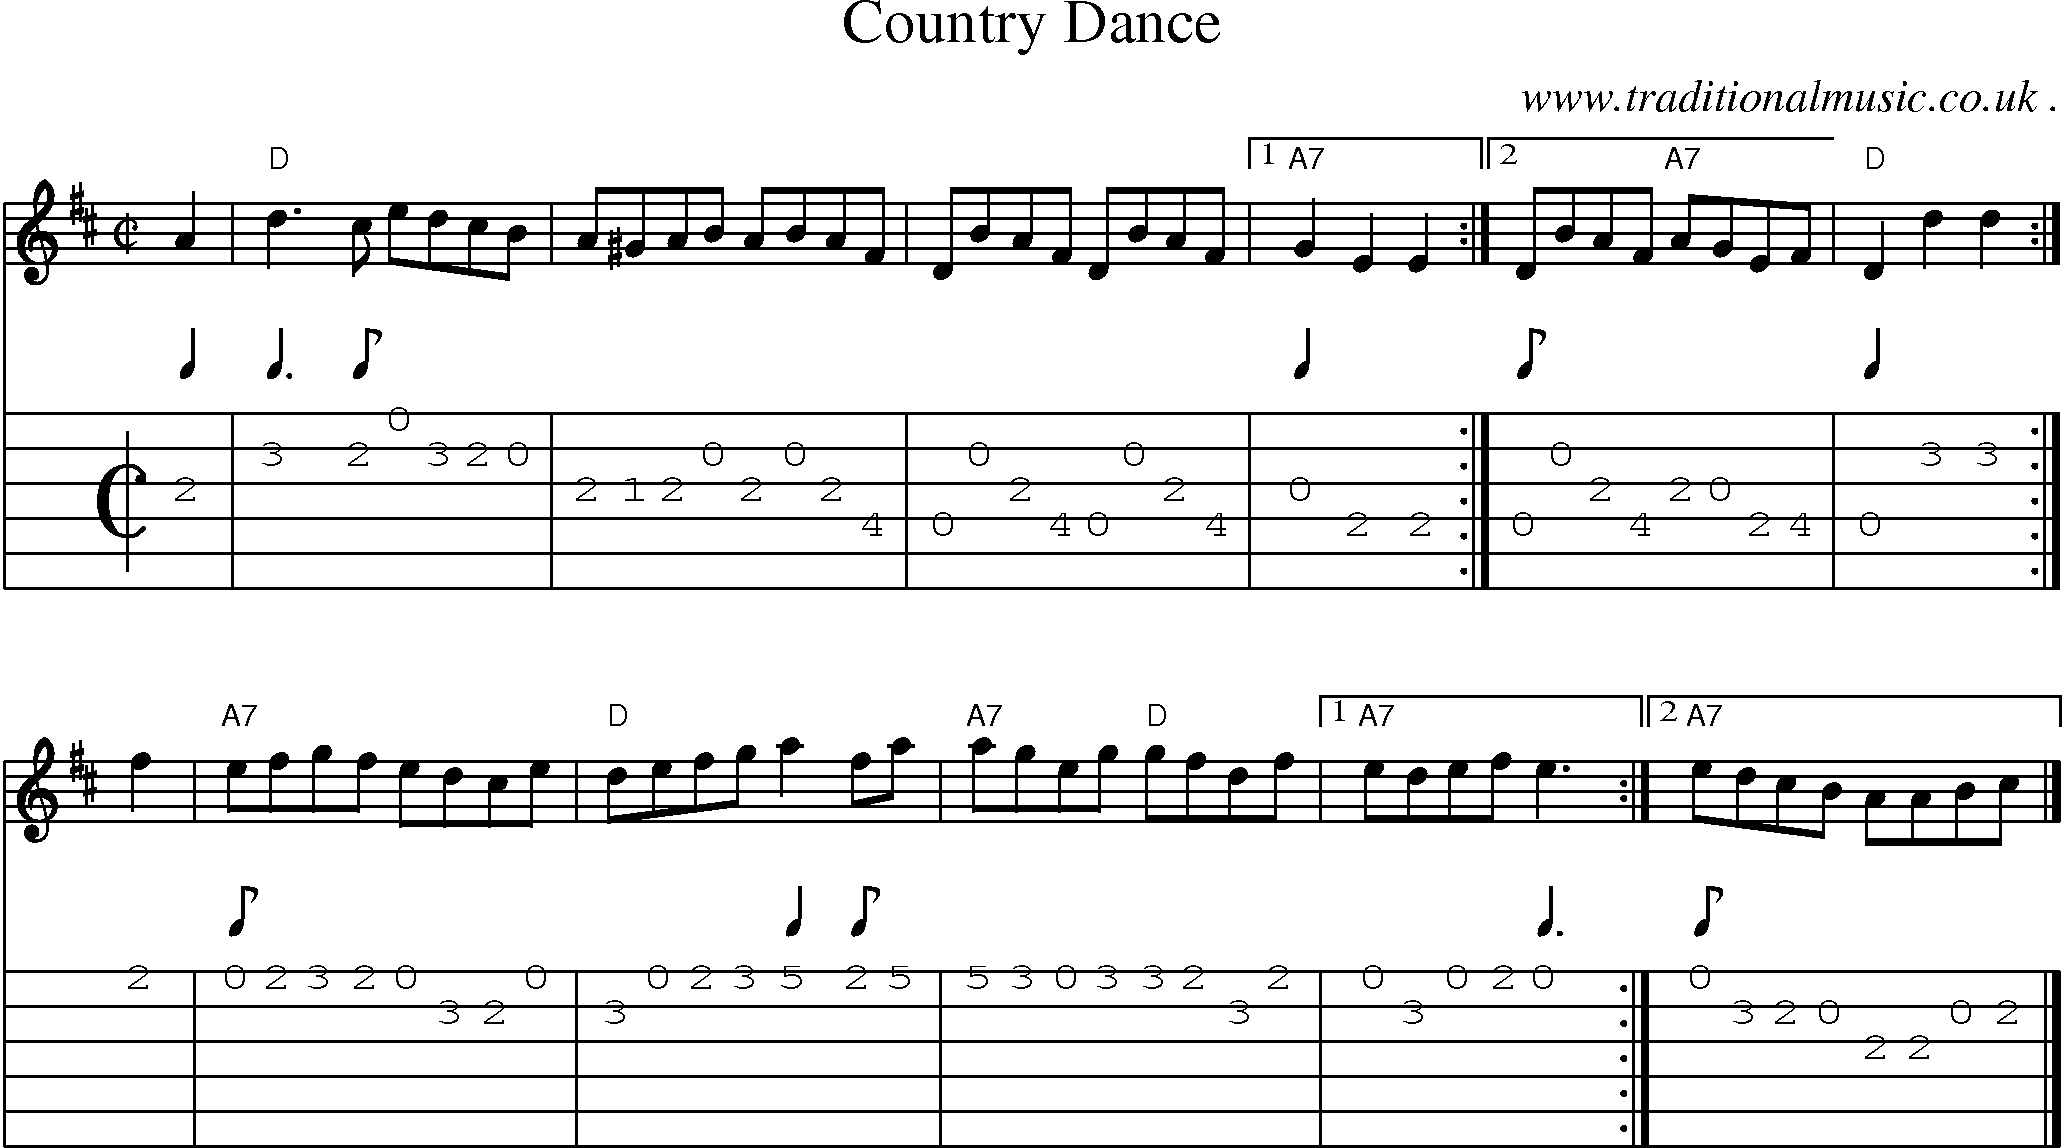 Sheet-music  score, Chords and Guitar Tabs for Country Dance